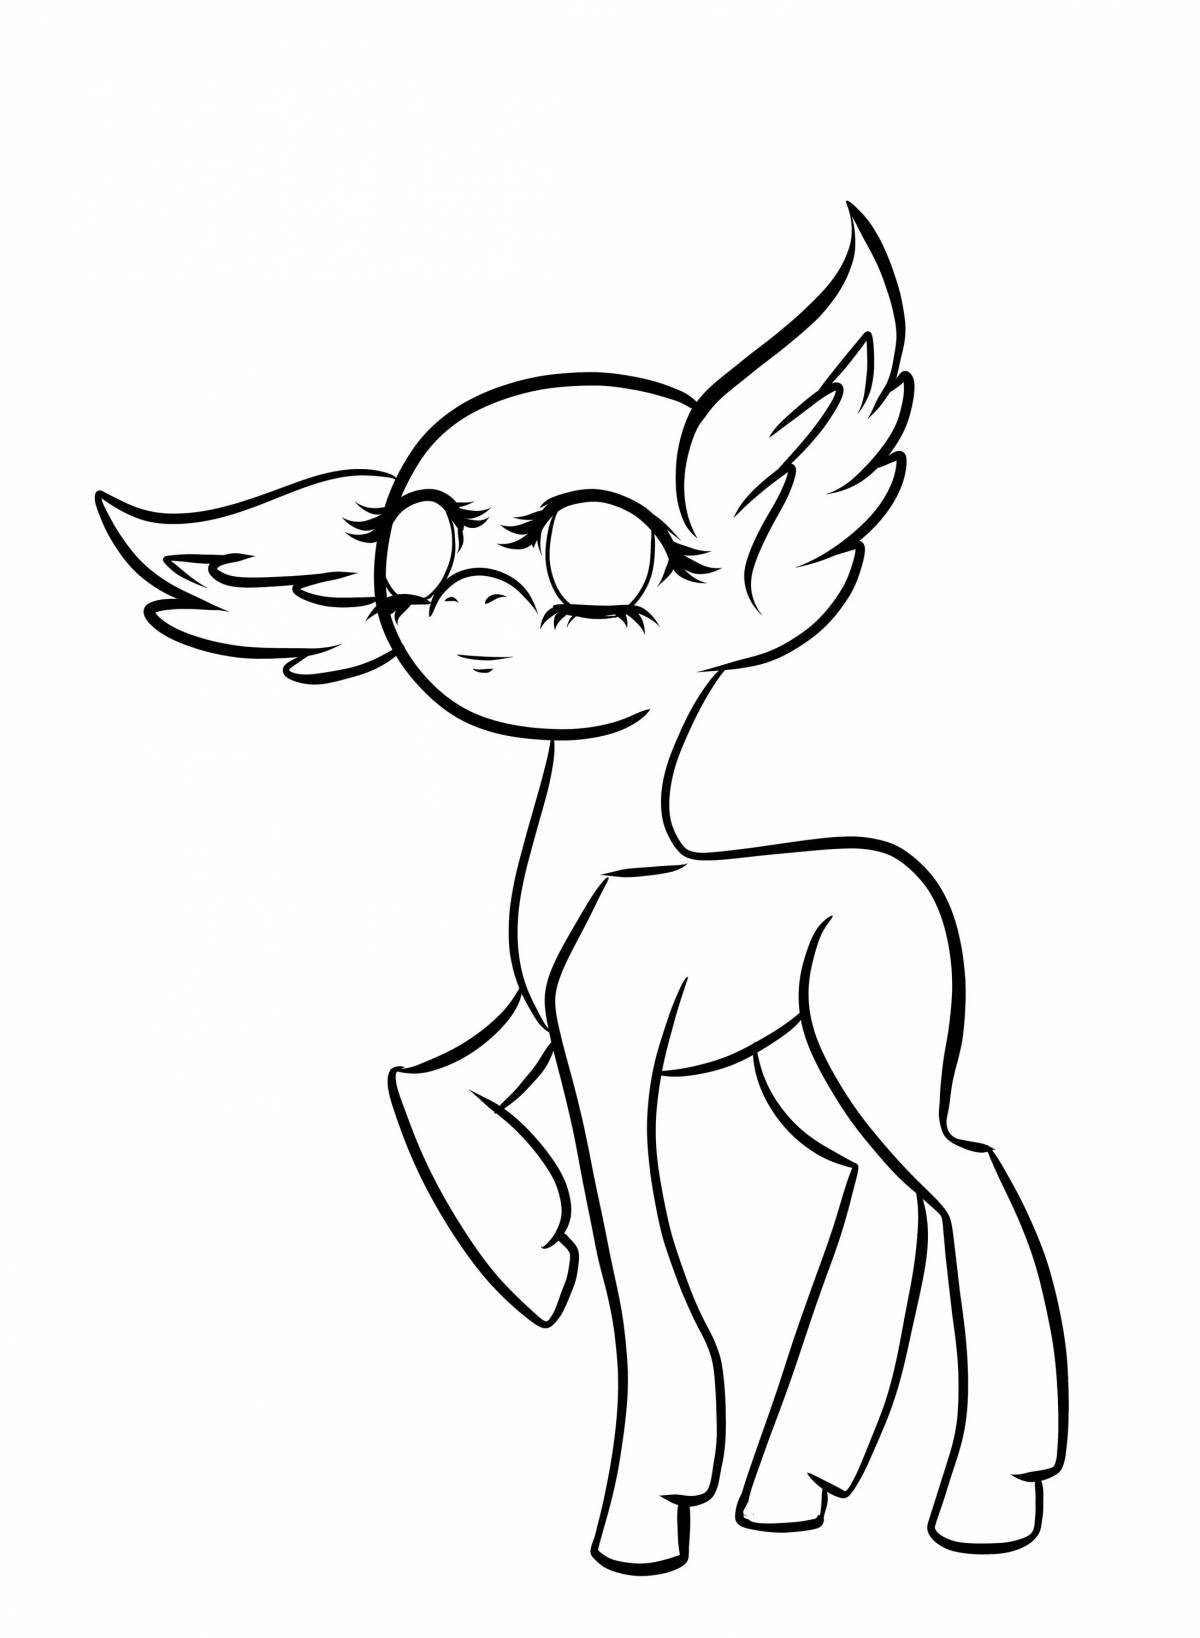 Live pony mannequin coloring book